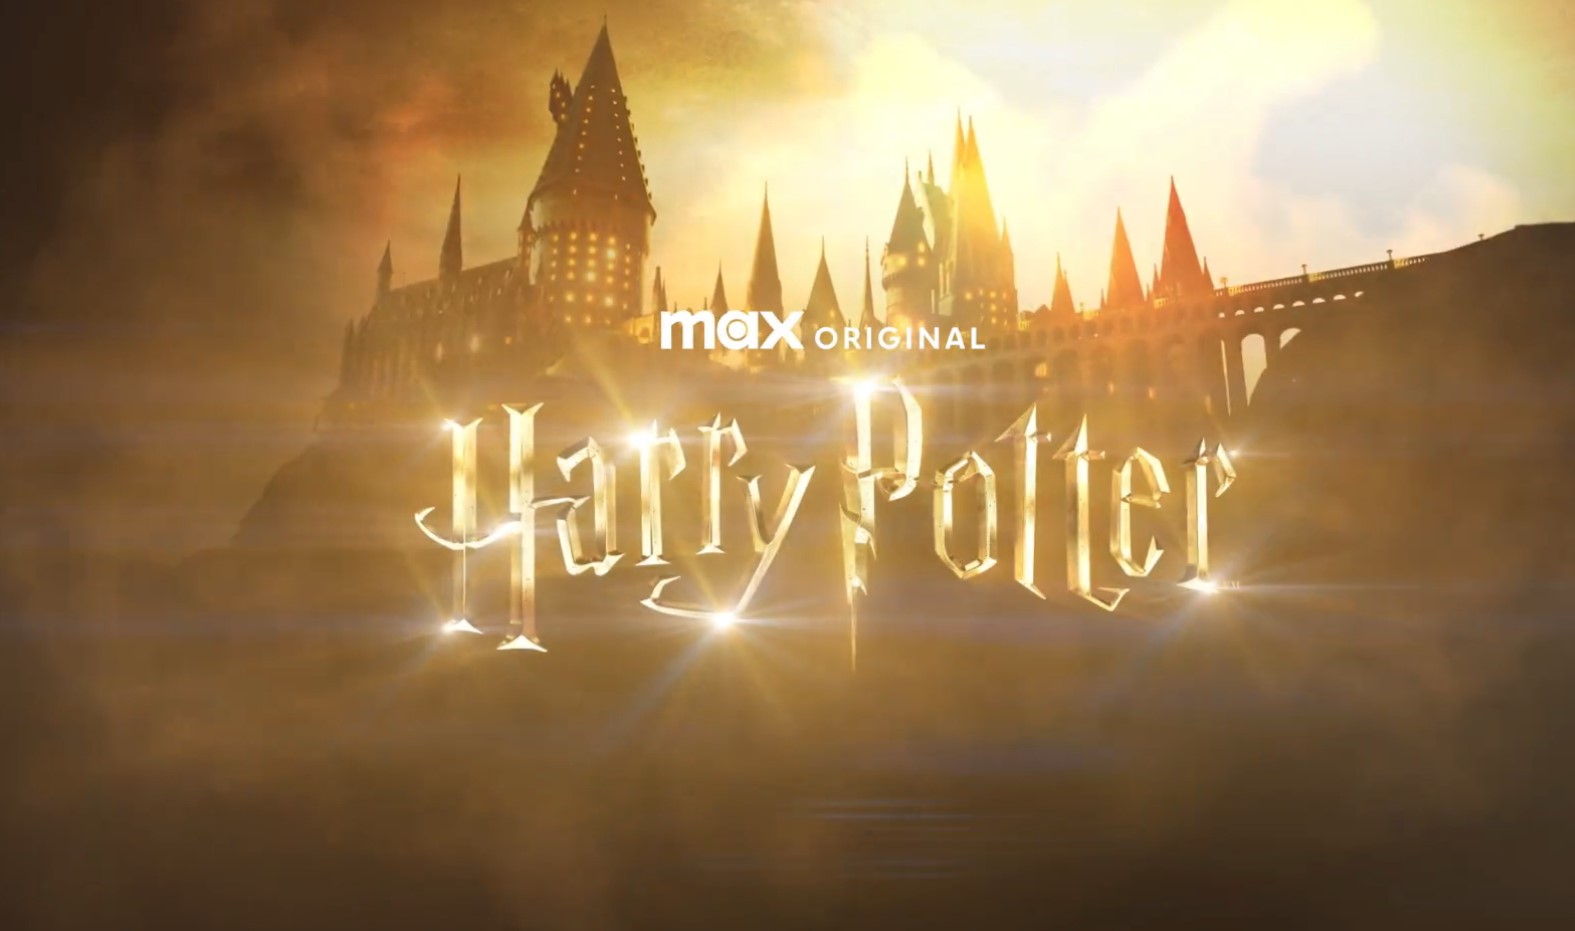 It's Official HBO Max Confirms Harry Potter Television Series The A